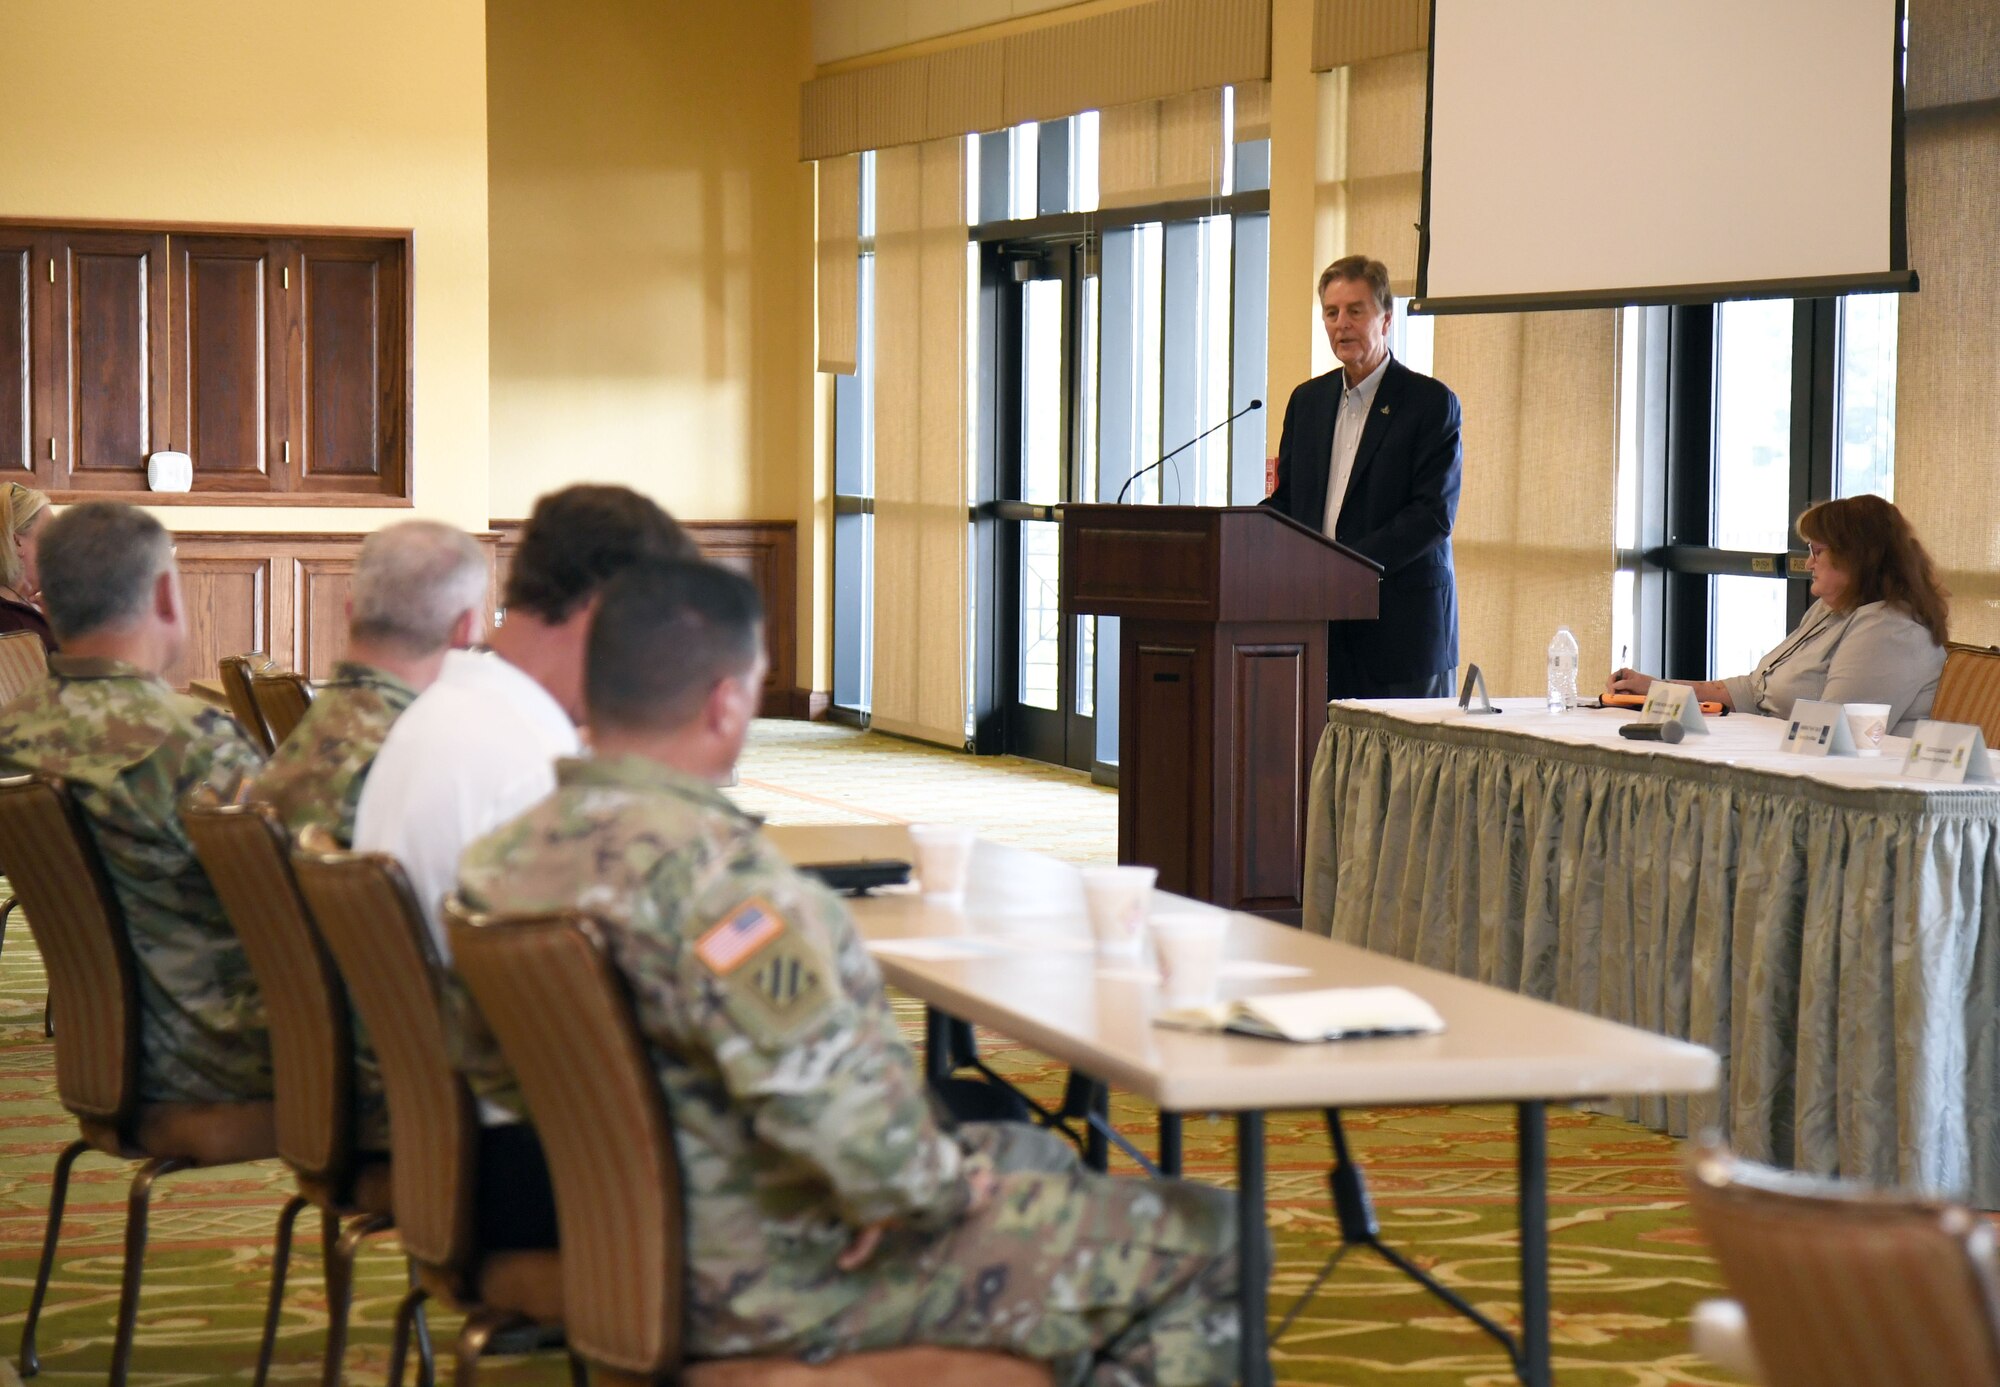 Mayor Andrew "FoFo" Gilich, Mayor of Biloxi, Mississippi, delivers a brief during the Industry Day Exchange Proposed Mixed-Use Enhanced Use Lease meeting inside the Bay Breeze Event Center at Keesler Air Force Base, Mississippi, Sept. 15, 2022. The Air Force Civil Engineer Center and 81st Training Wing hosted the event to explore the possibility of a Cyber Processing Center opportunity at Keesler. (U.S. Air Force photo by Kemberly Groue)